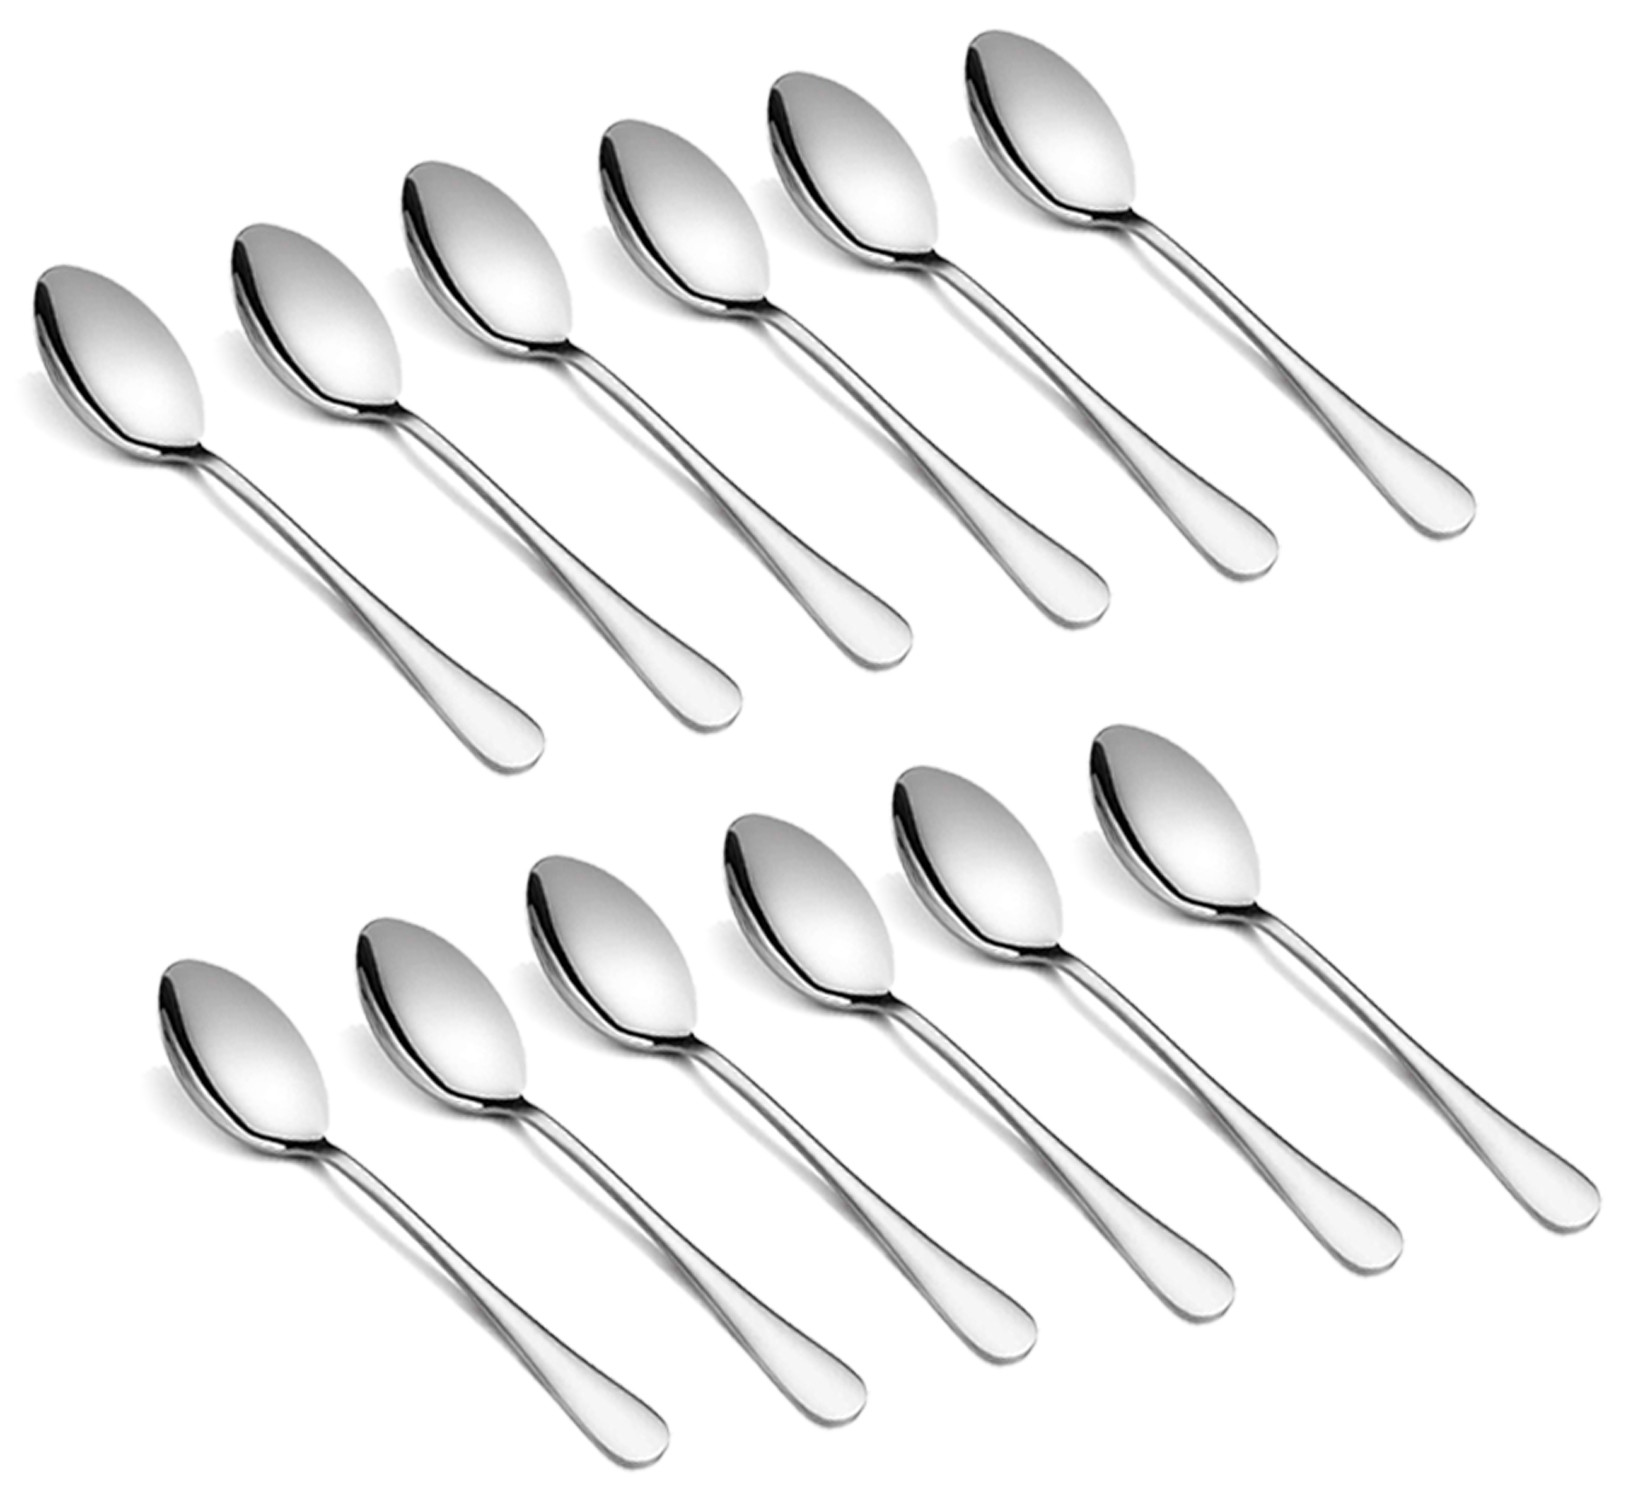 Kuber Industries Stainless Steel Dinner Spoons, Extra-Fine Mercury Tea Spoon for Home, Kitchen or Restaurant (Silver)-KUBMART15673